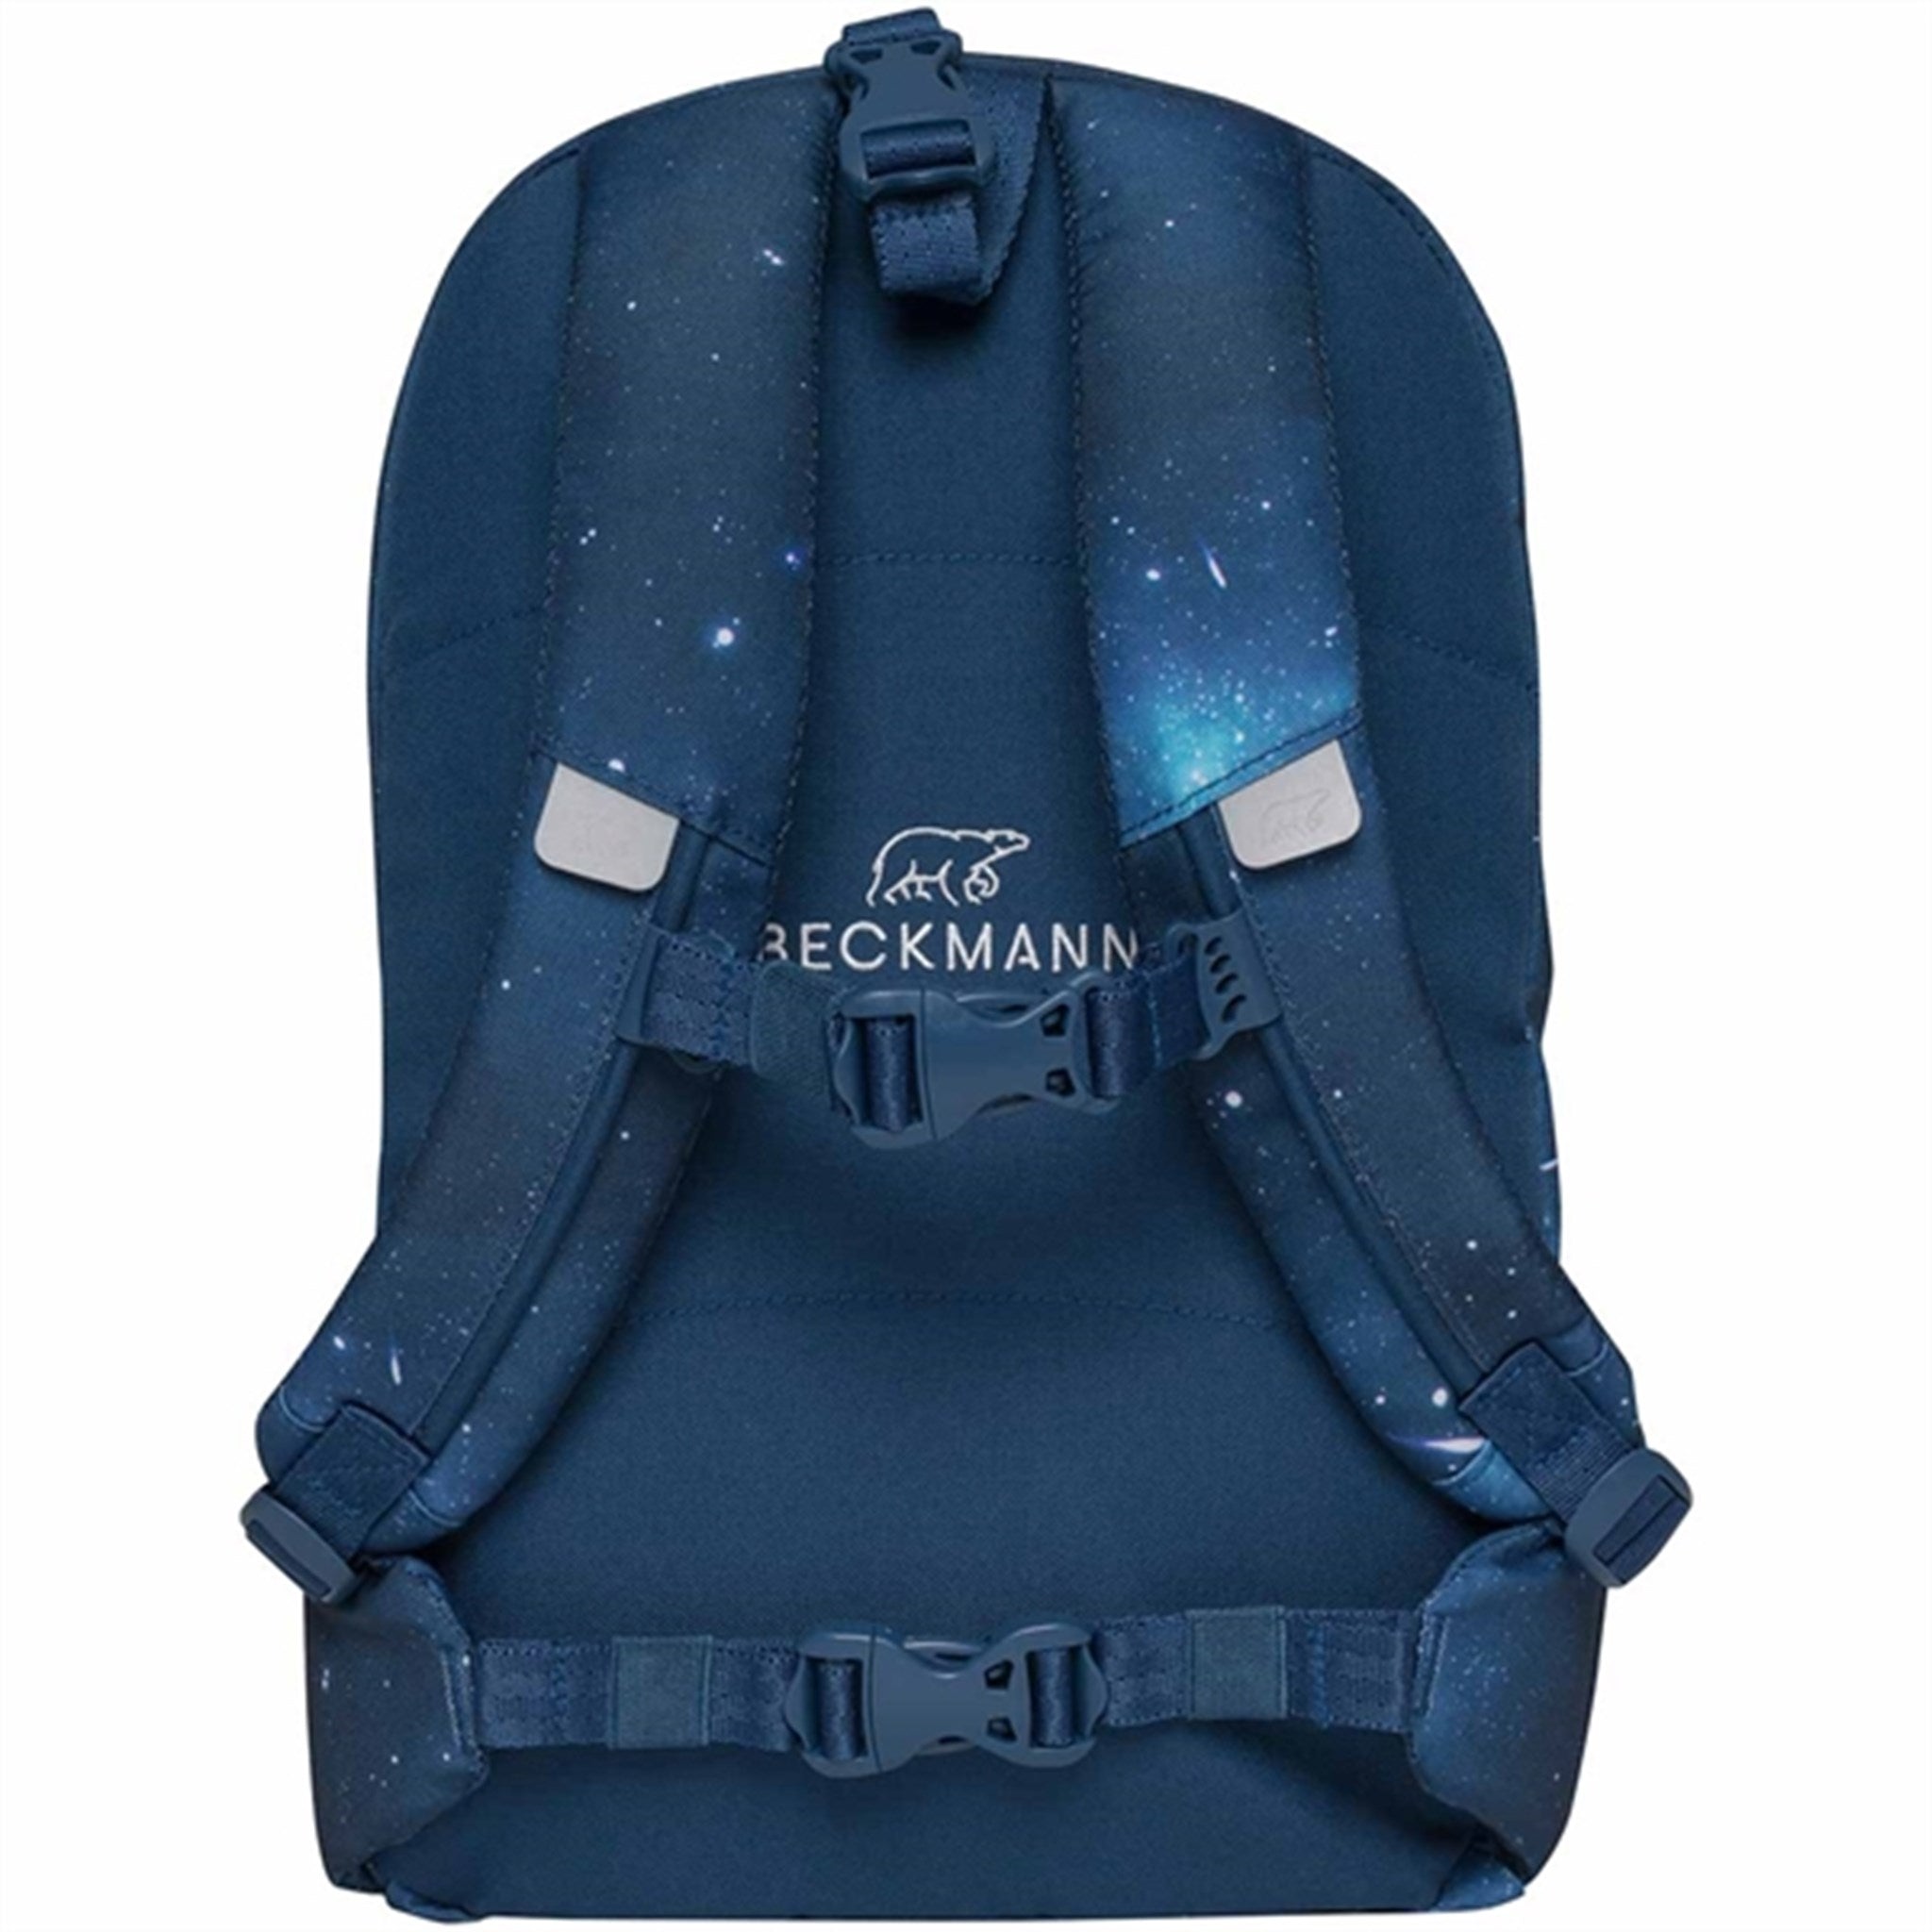 Beckmann Gym/Hiking Backpack Space Mission 2